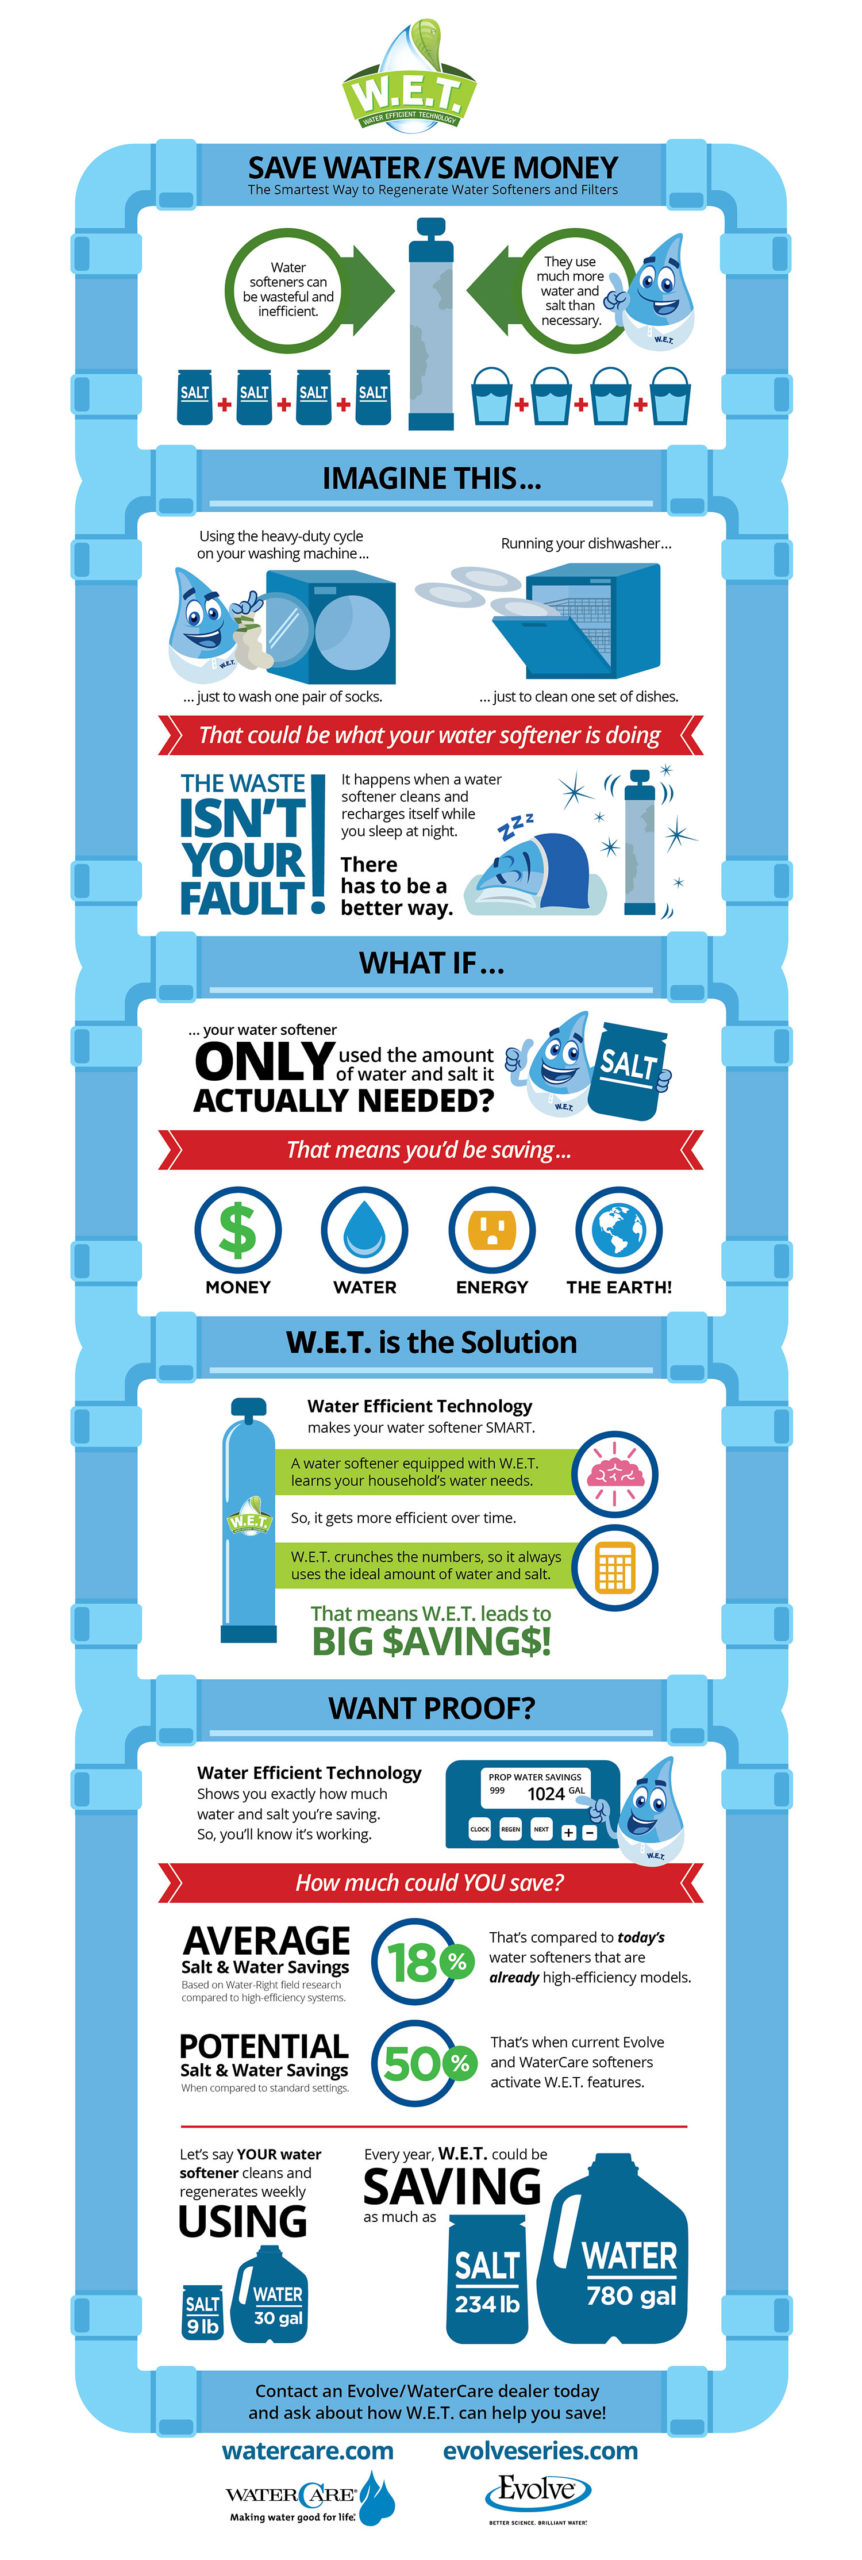 W.E.T. Infographic (Water Efficient Technology for water softeners)